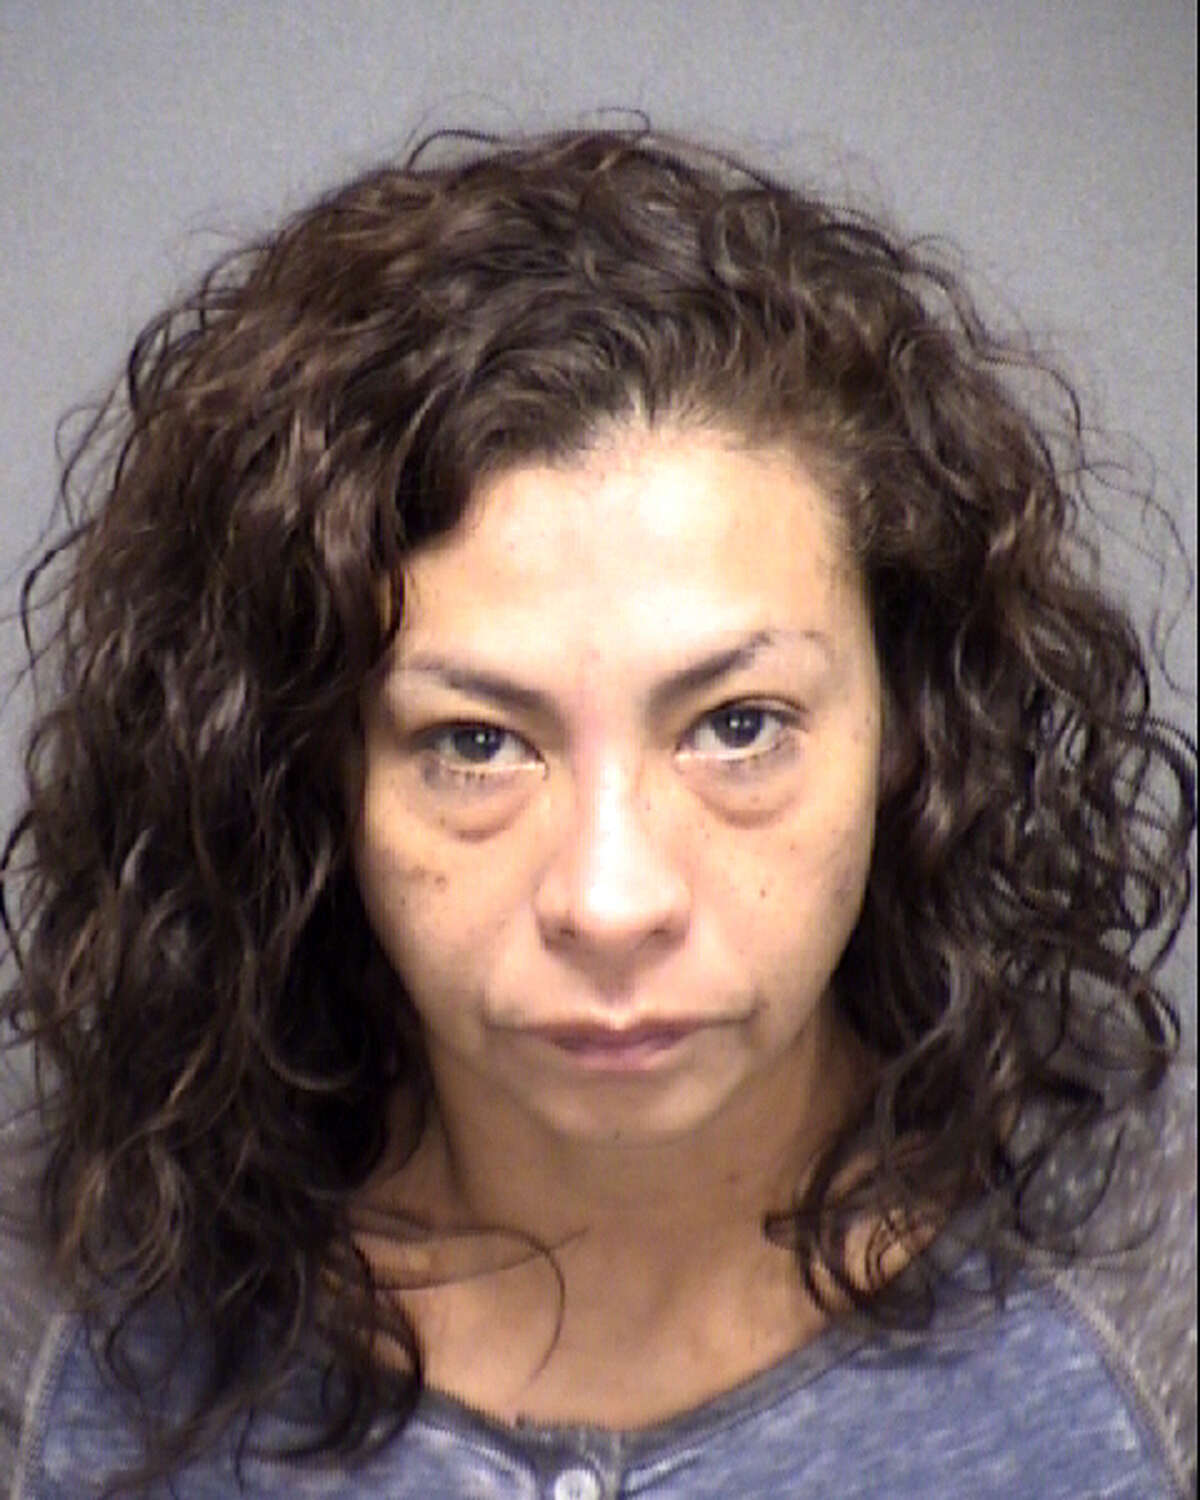 Angie Torres, 45, is facing a robbery charge unrelated to the King Jay Davila investigation.